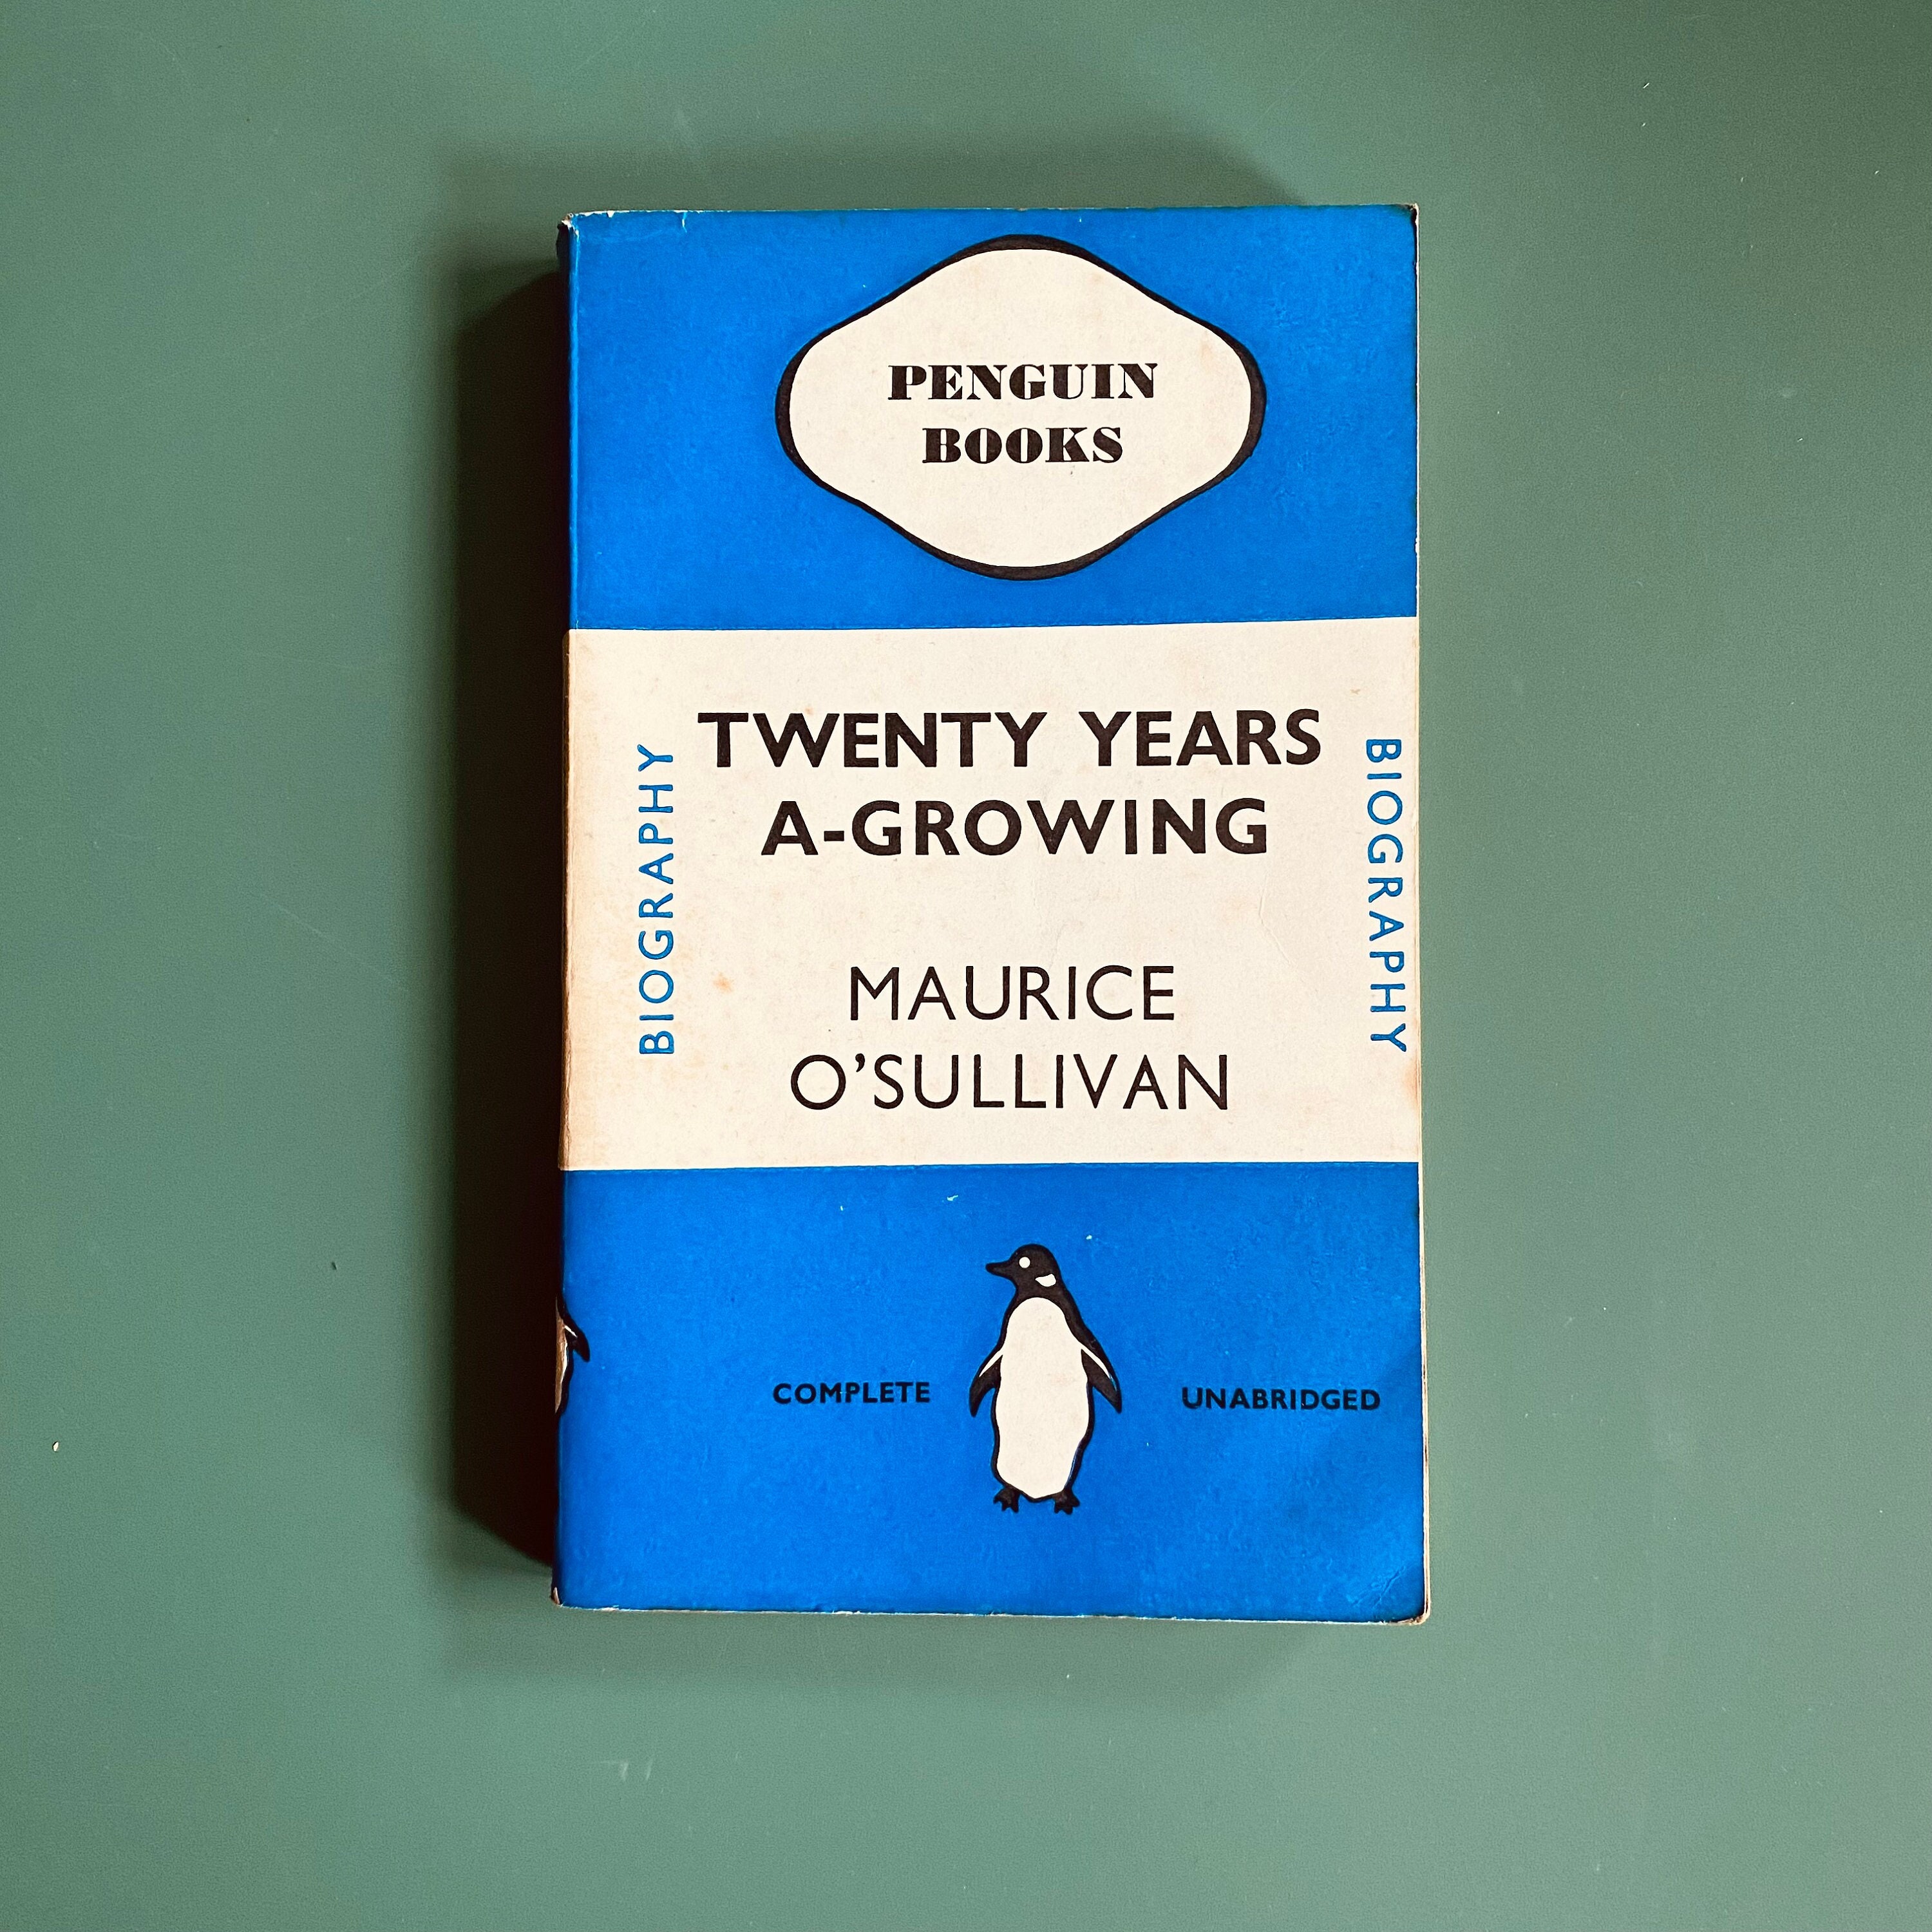 20 Years After the Redesigned Penguin —